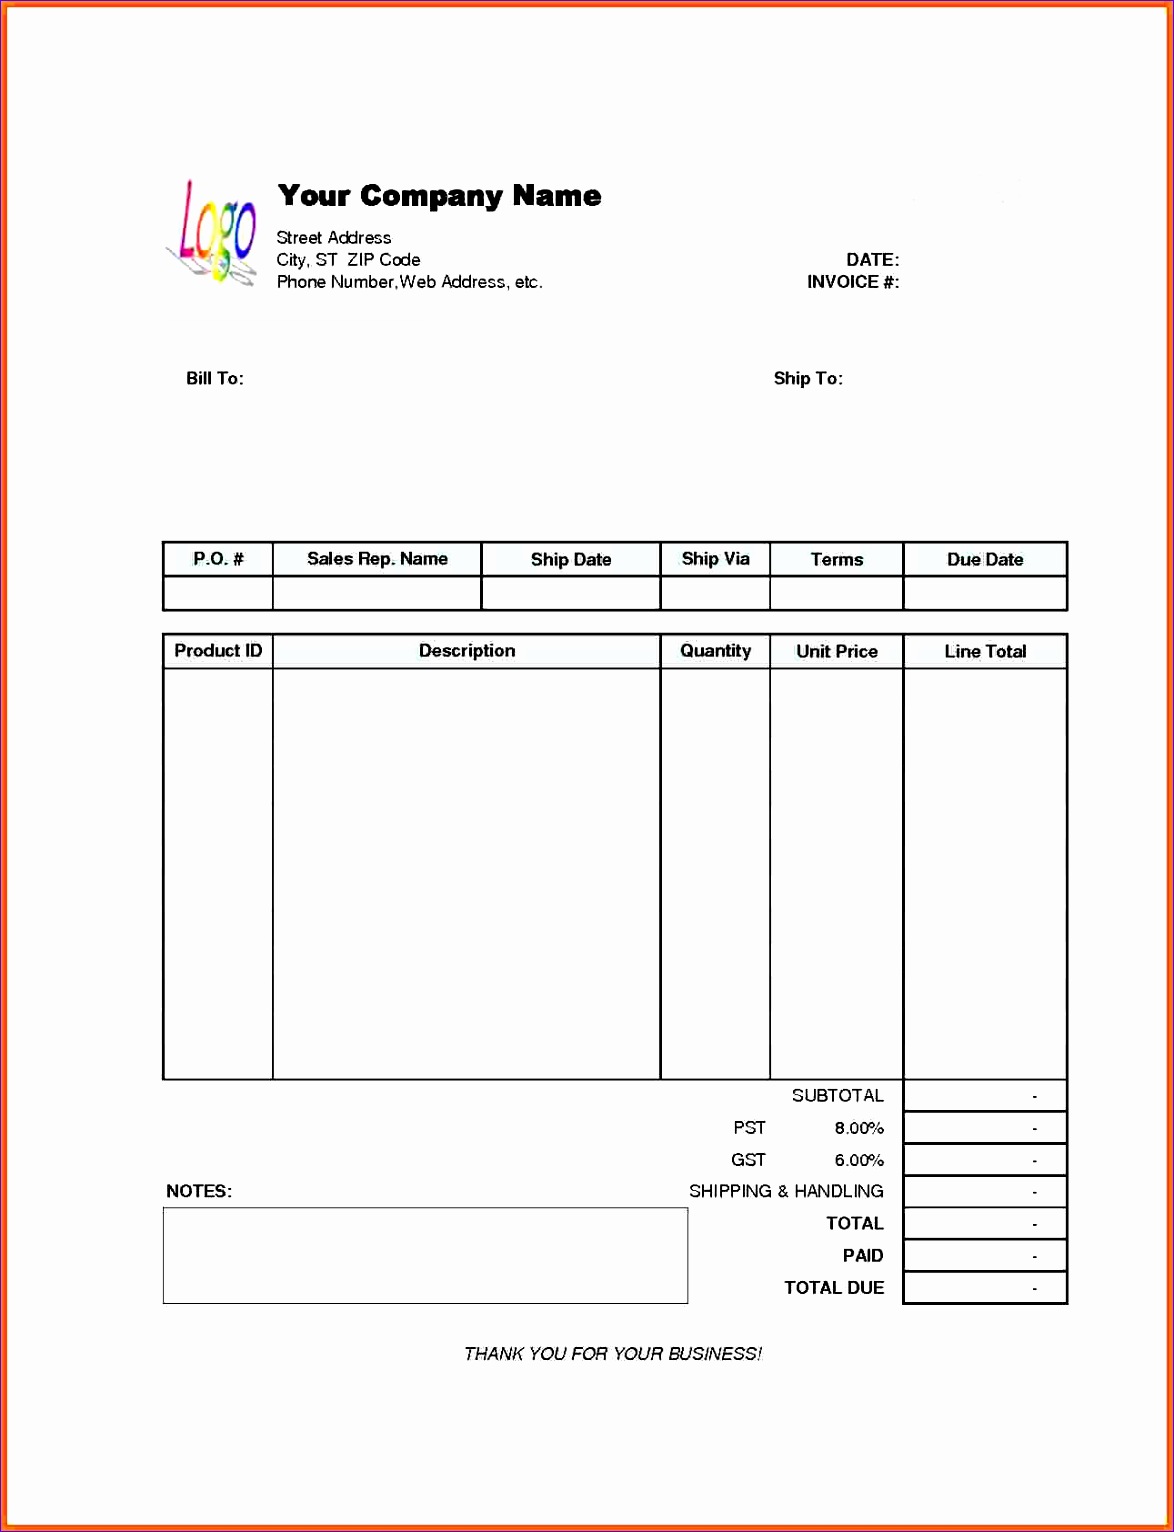 business invoice samples pany invoice template example small business nz 13 sample denial letter construction 685 format p excel word uk australia free canada simple victoria